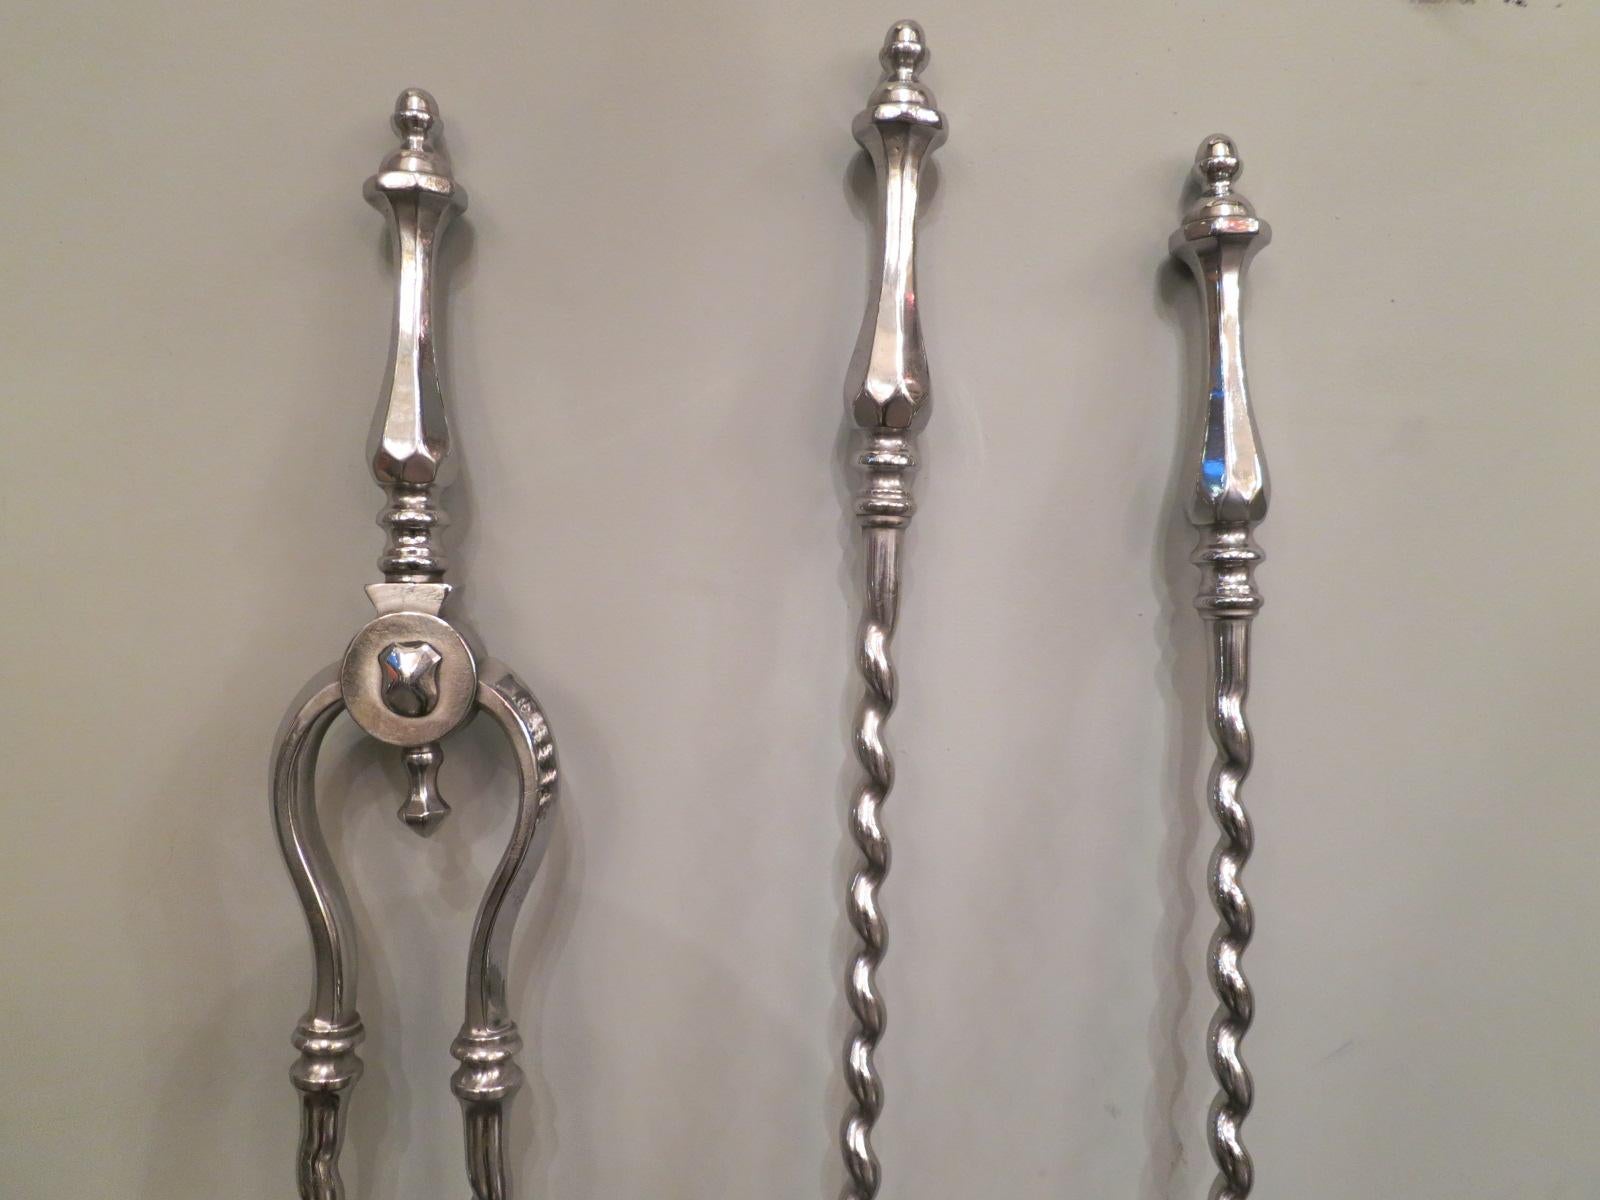 A set of tools in polished steel with barley twist design. English 19th century.